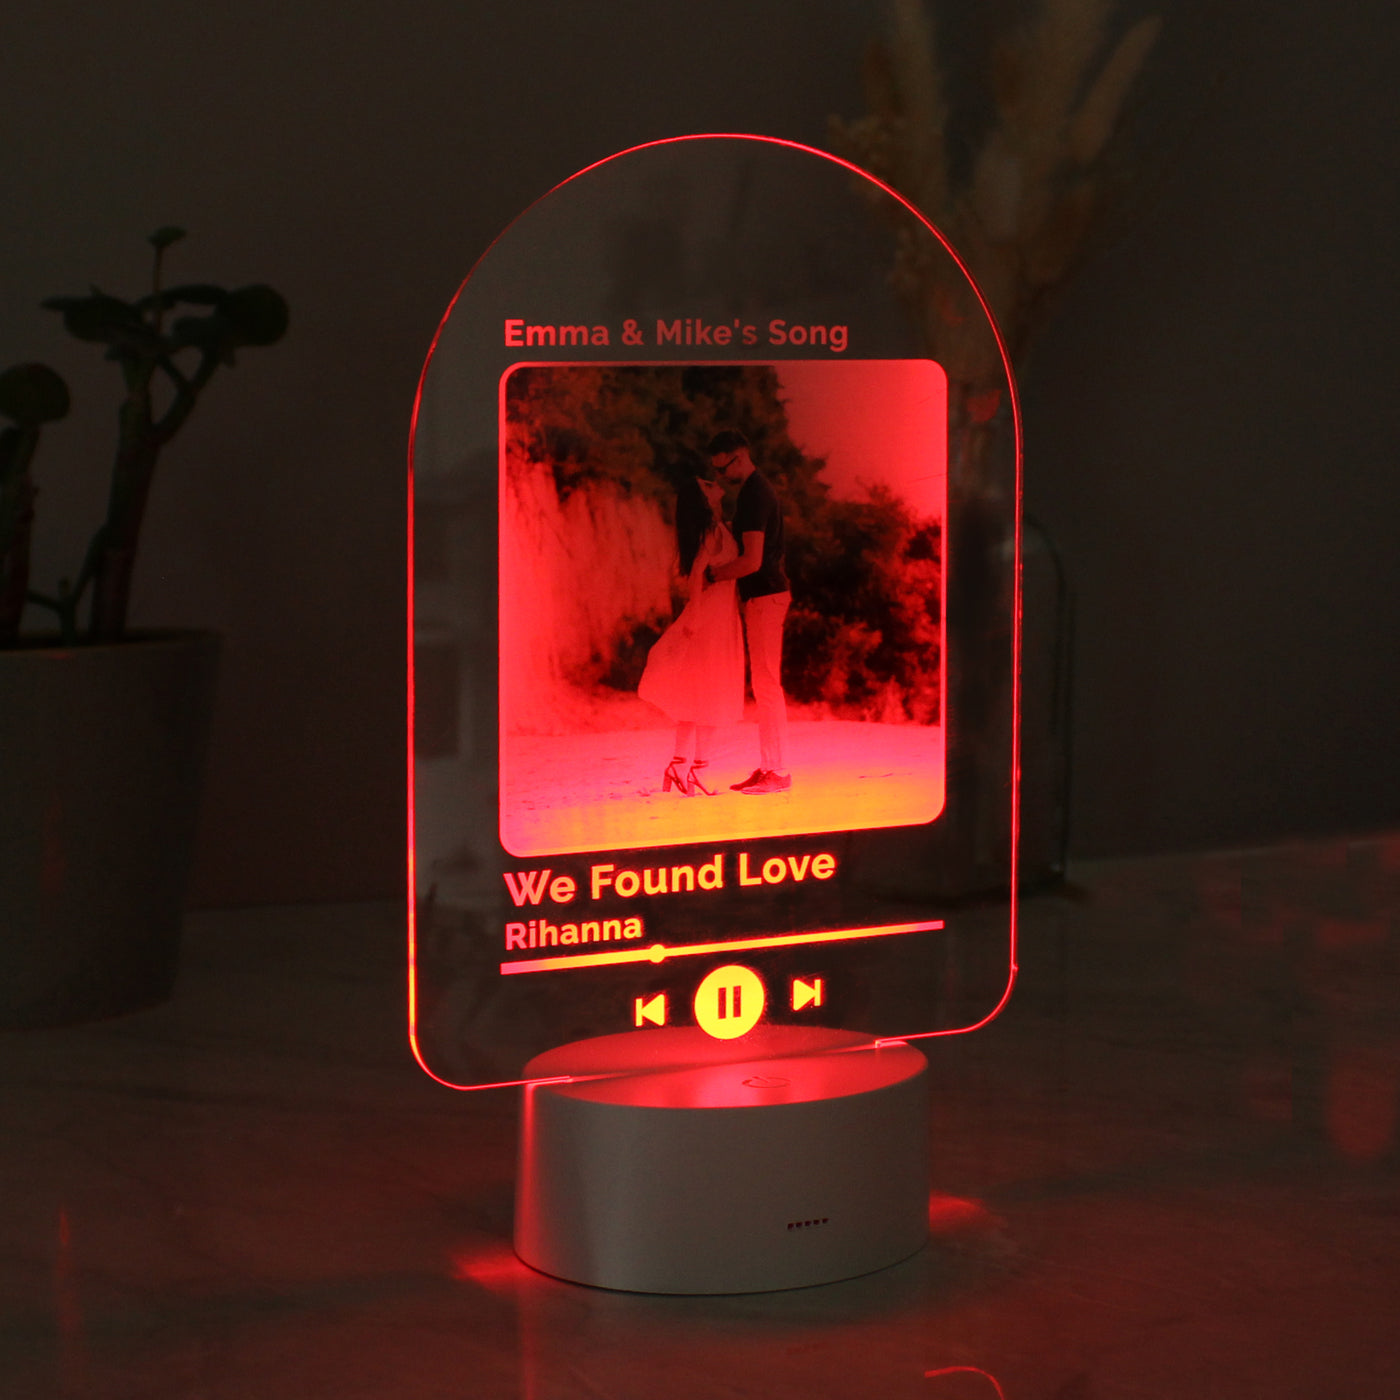 Personalised Any Song LED Photo Upload Colour Changing Light